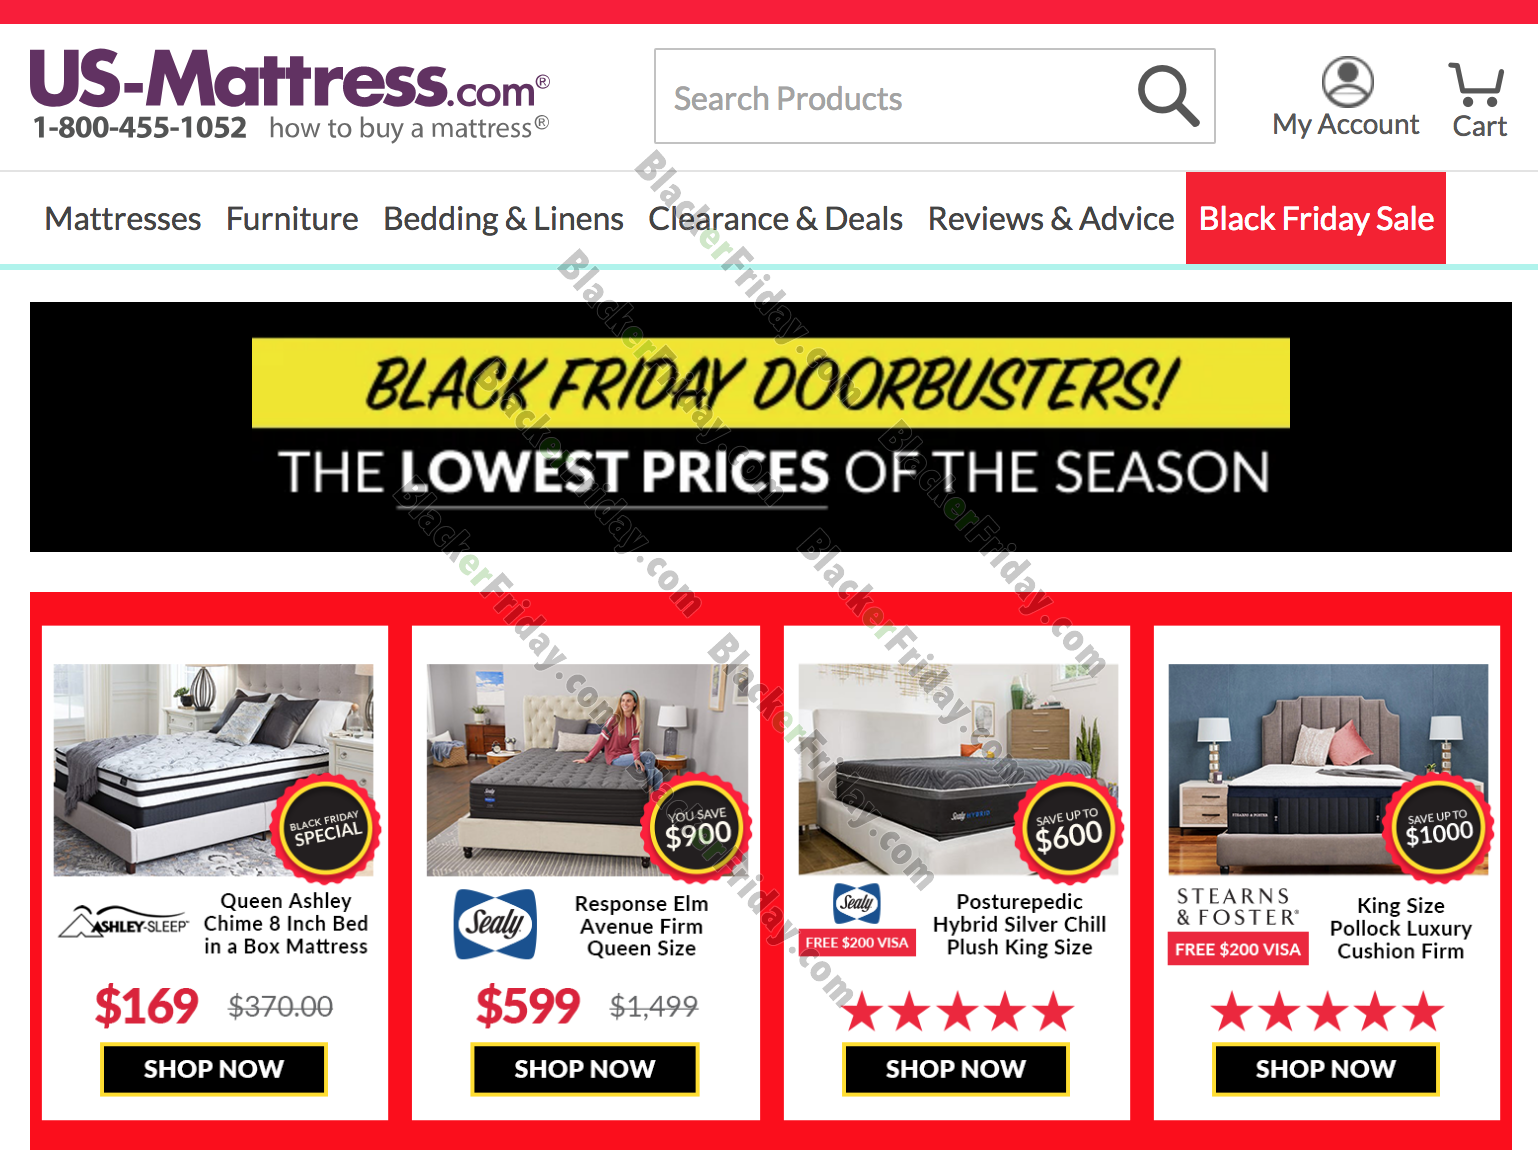 US Mattress Black Friday 2020 Sale - What to Expect - Blacker Friday